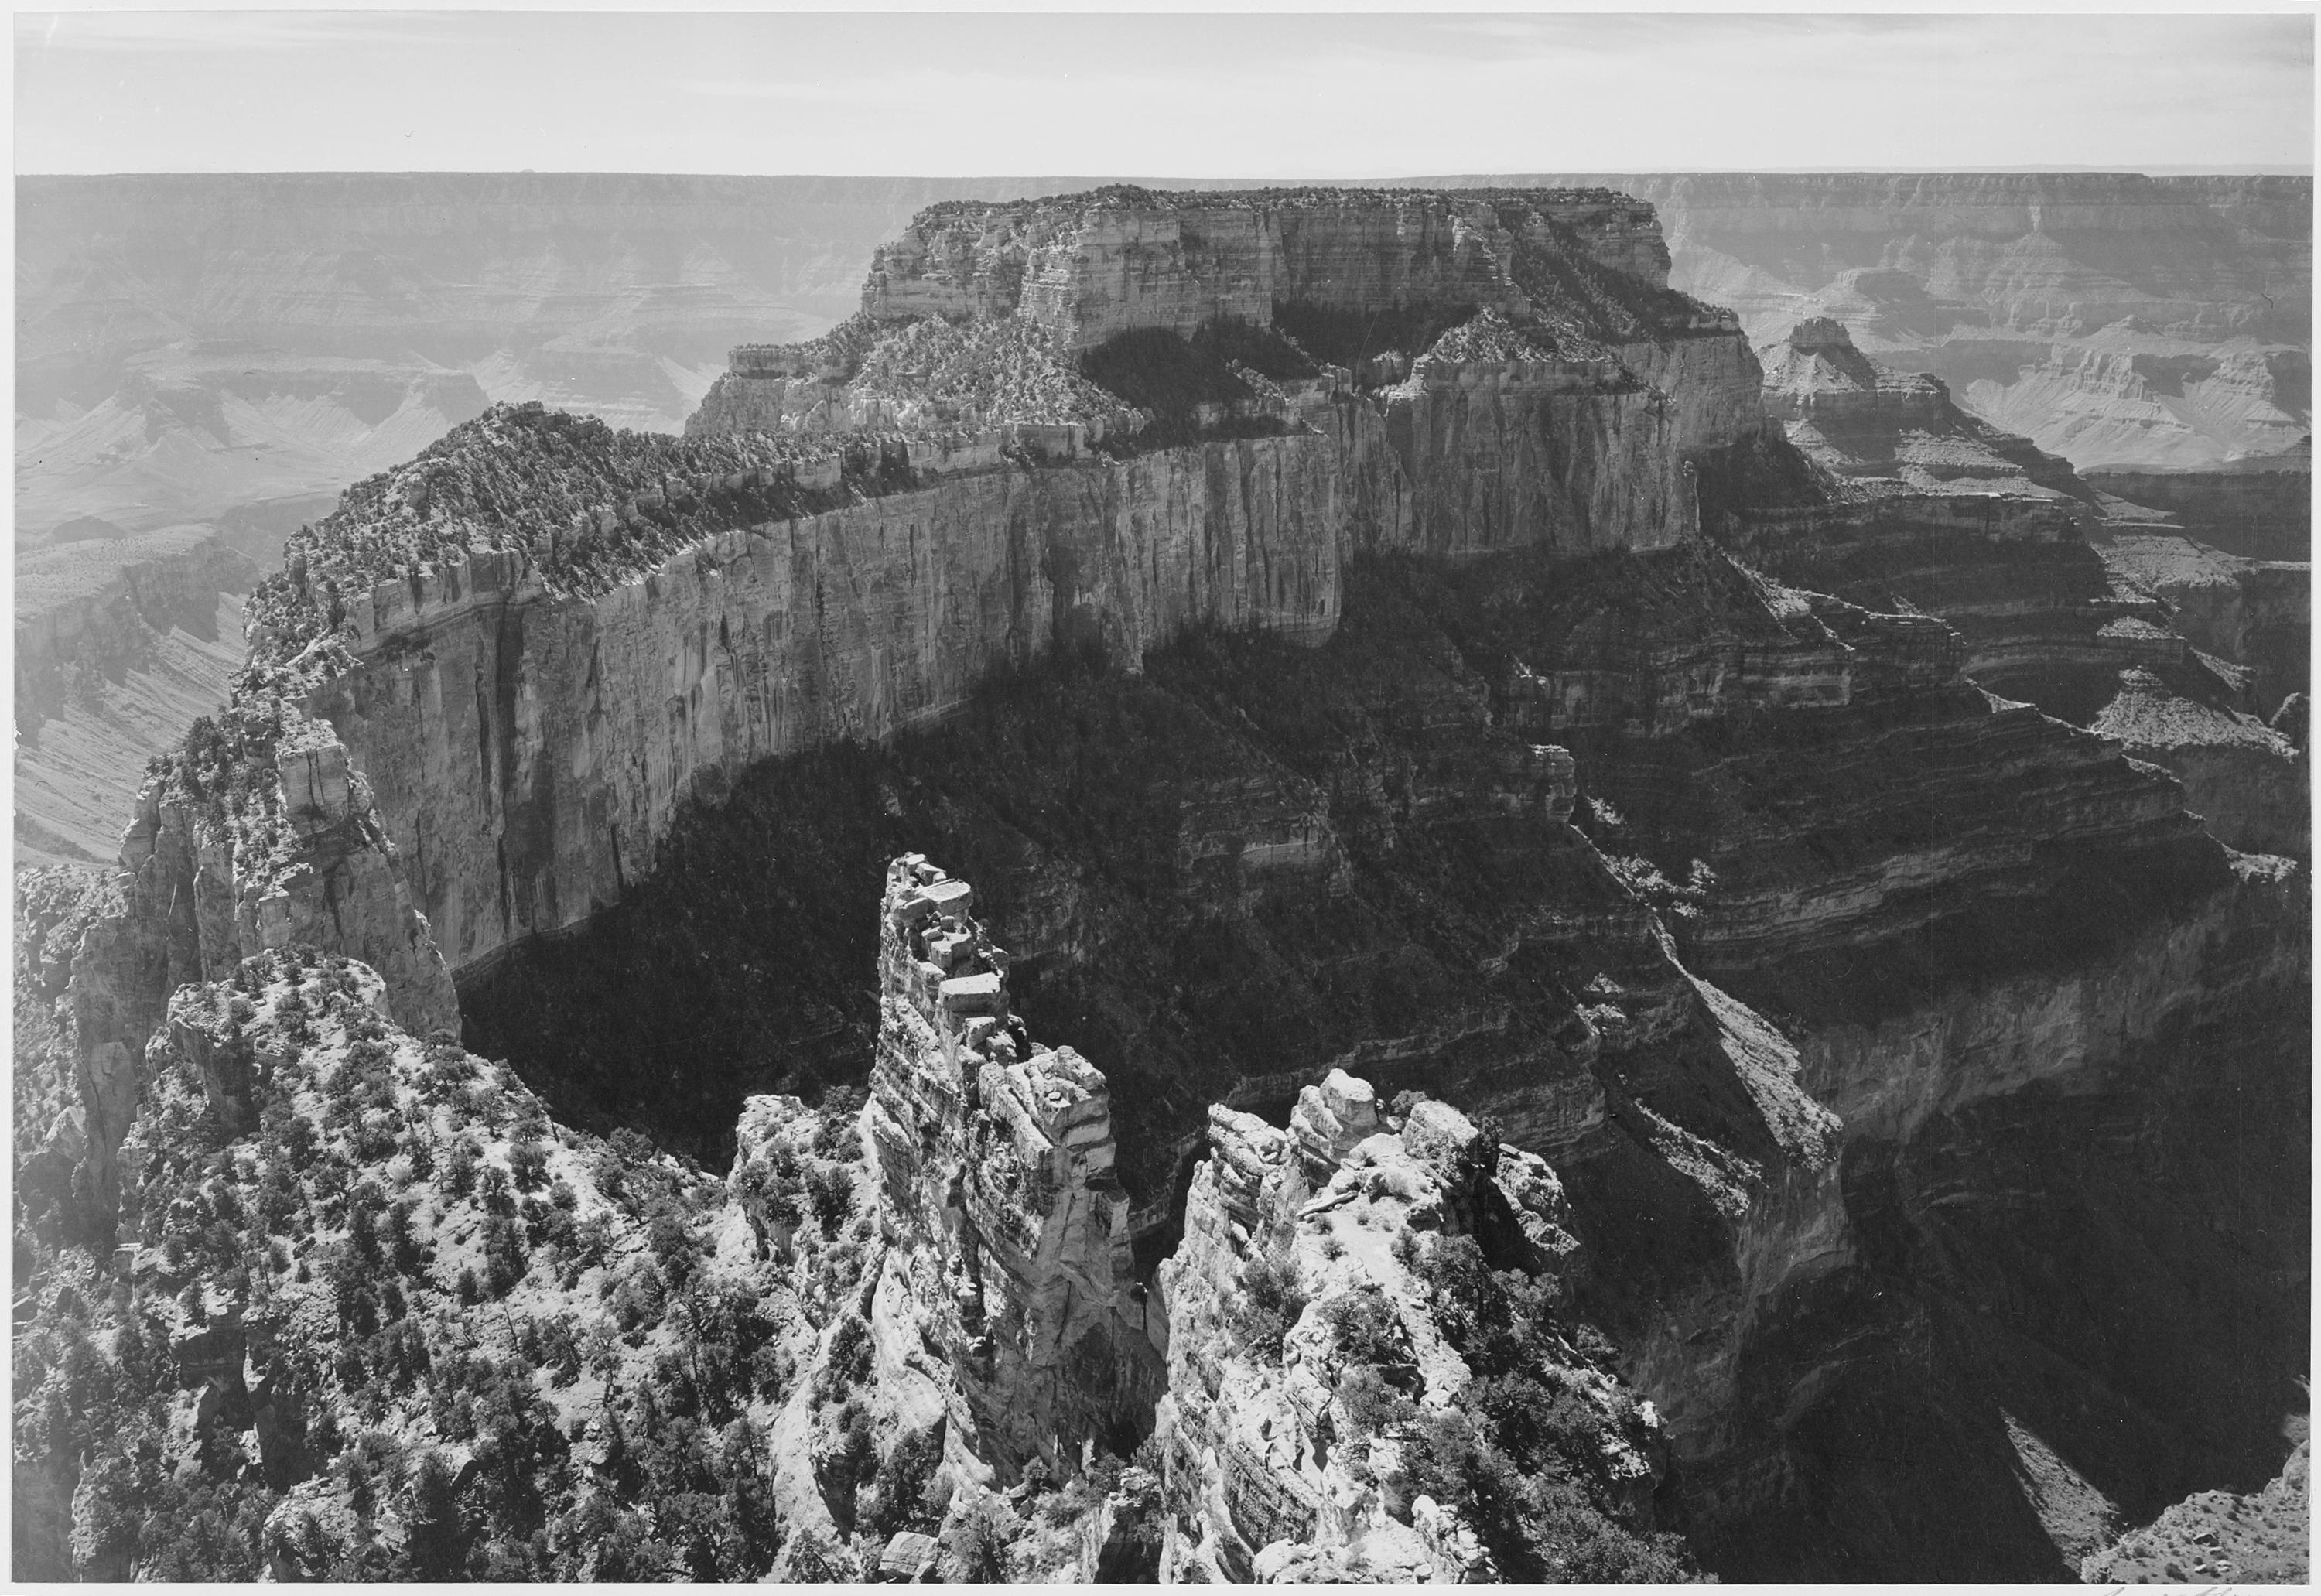 Ansel Adams - National Archives 79-AA-F22